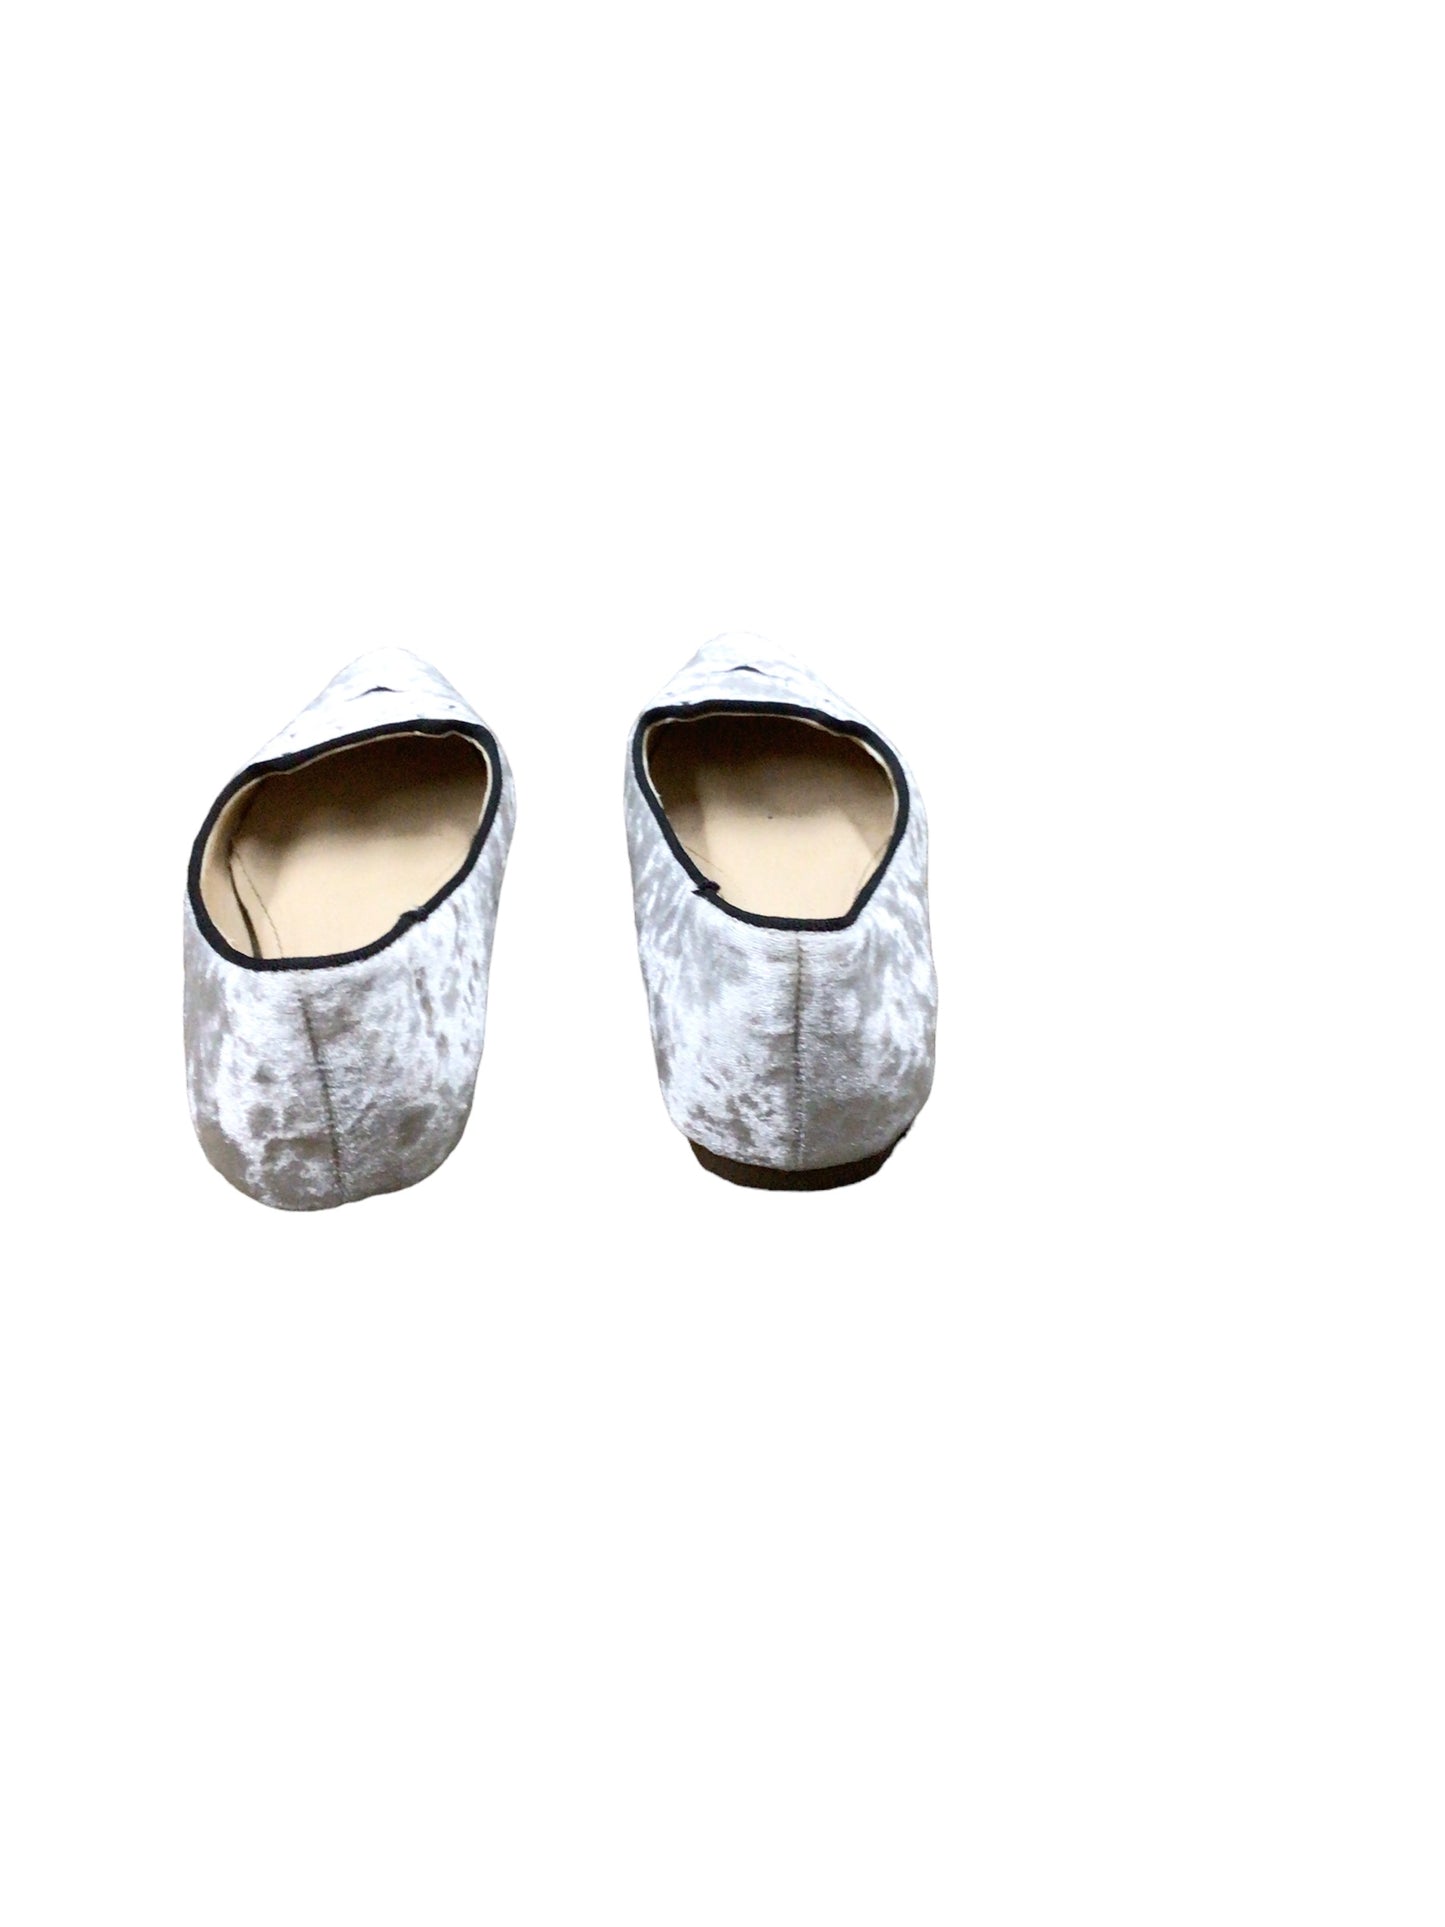 Shoes Flats Loafer Oxford By Cme  Size: 7